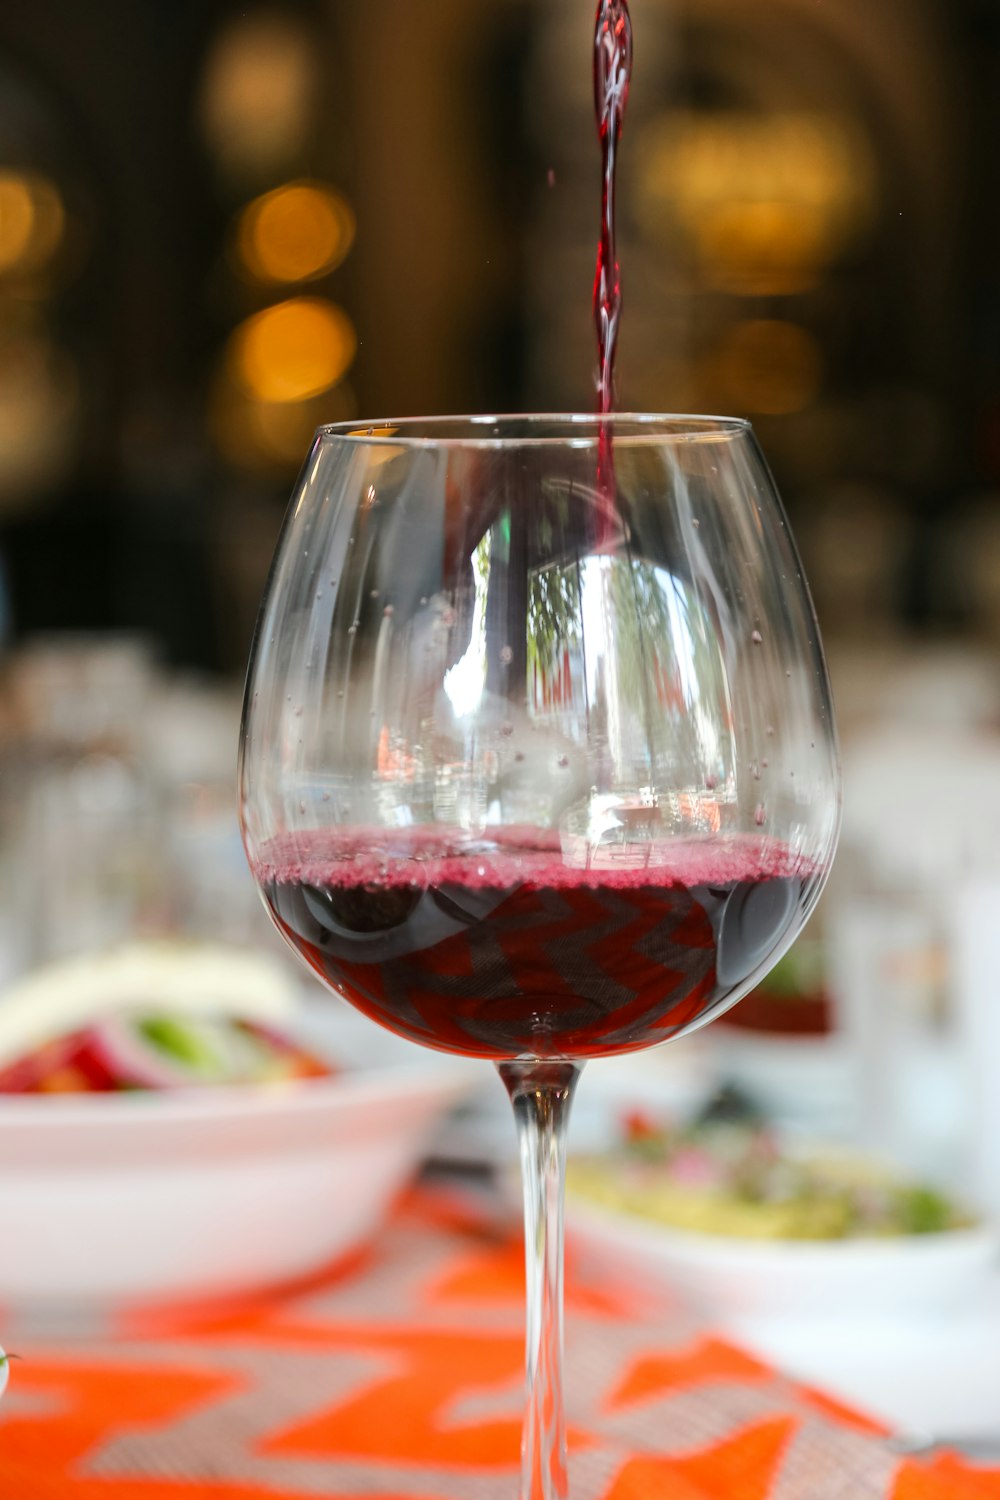 a red wine being poured into a wine glass